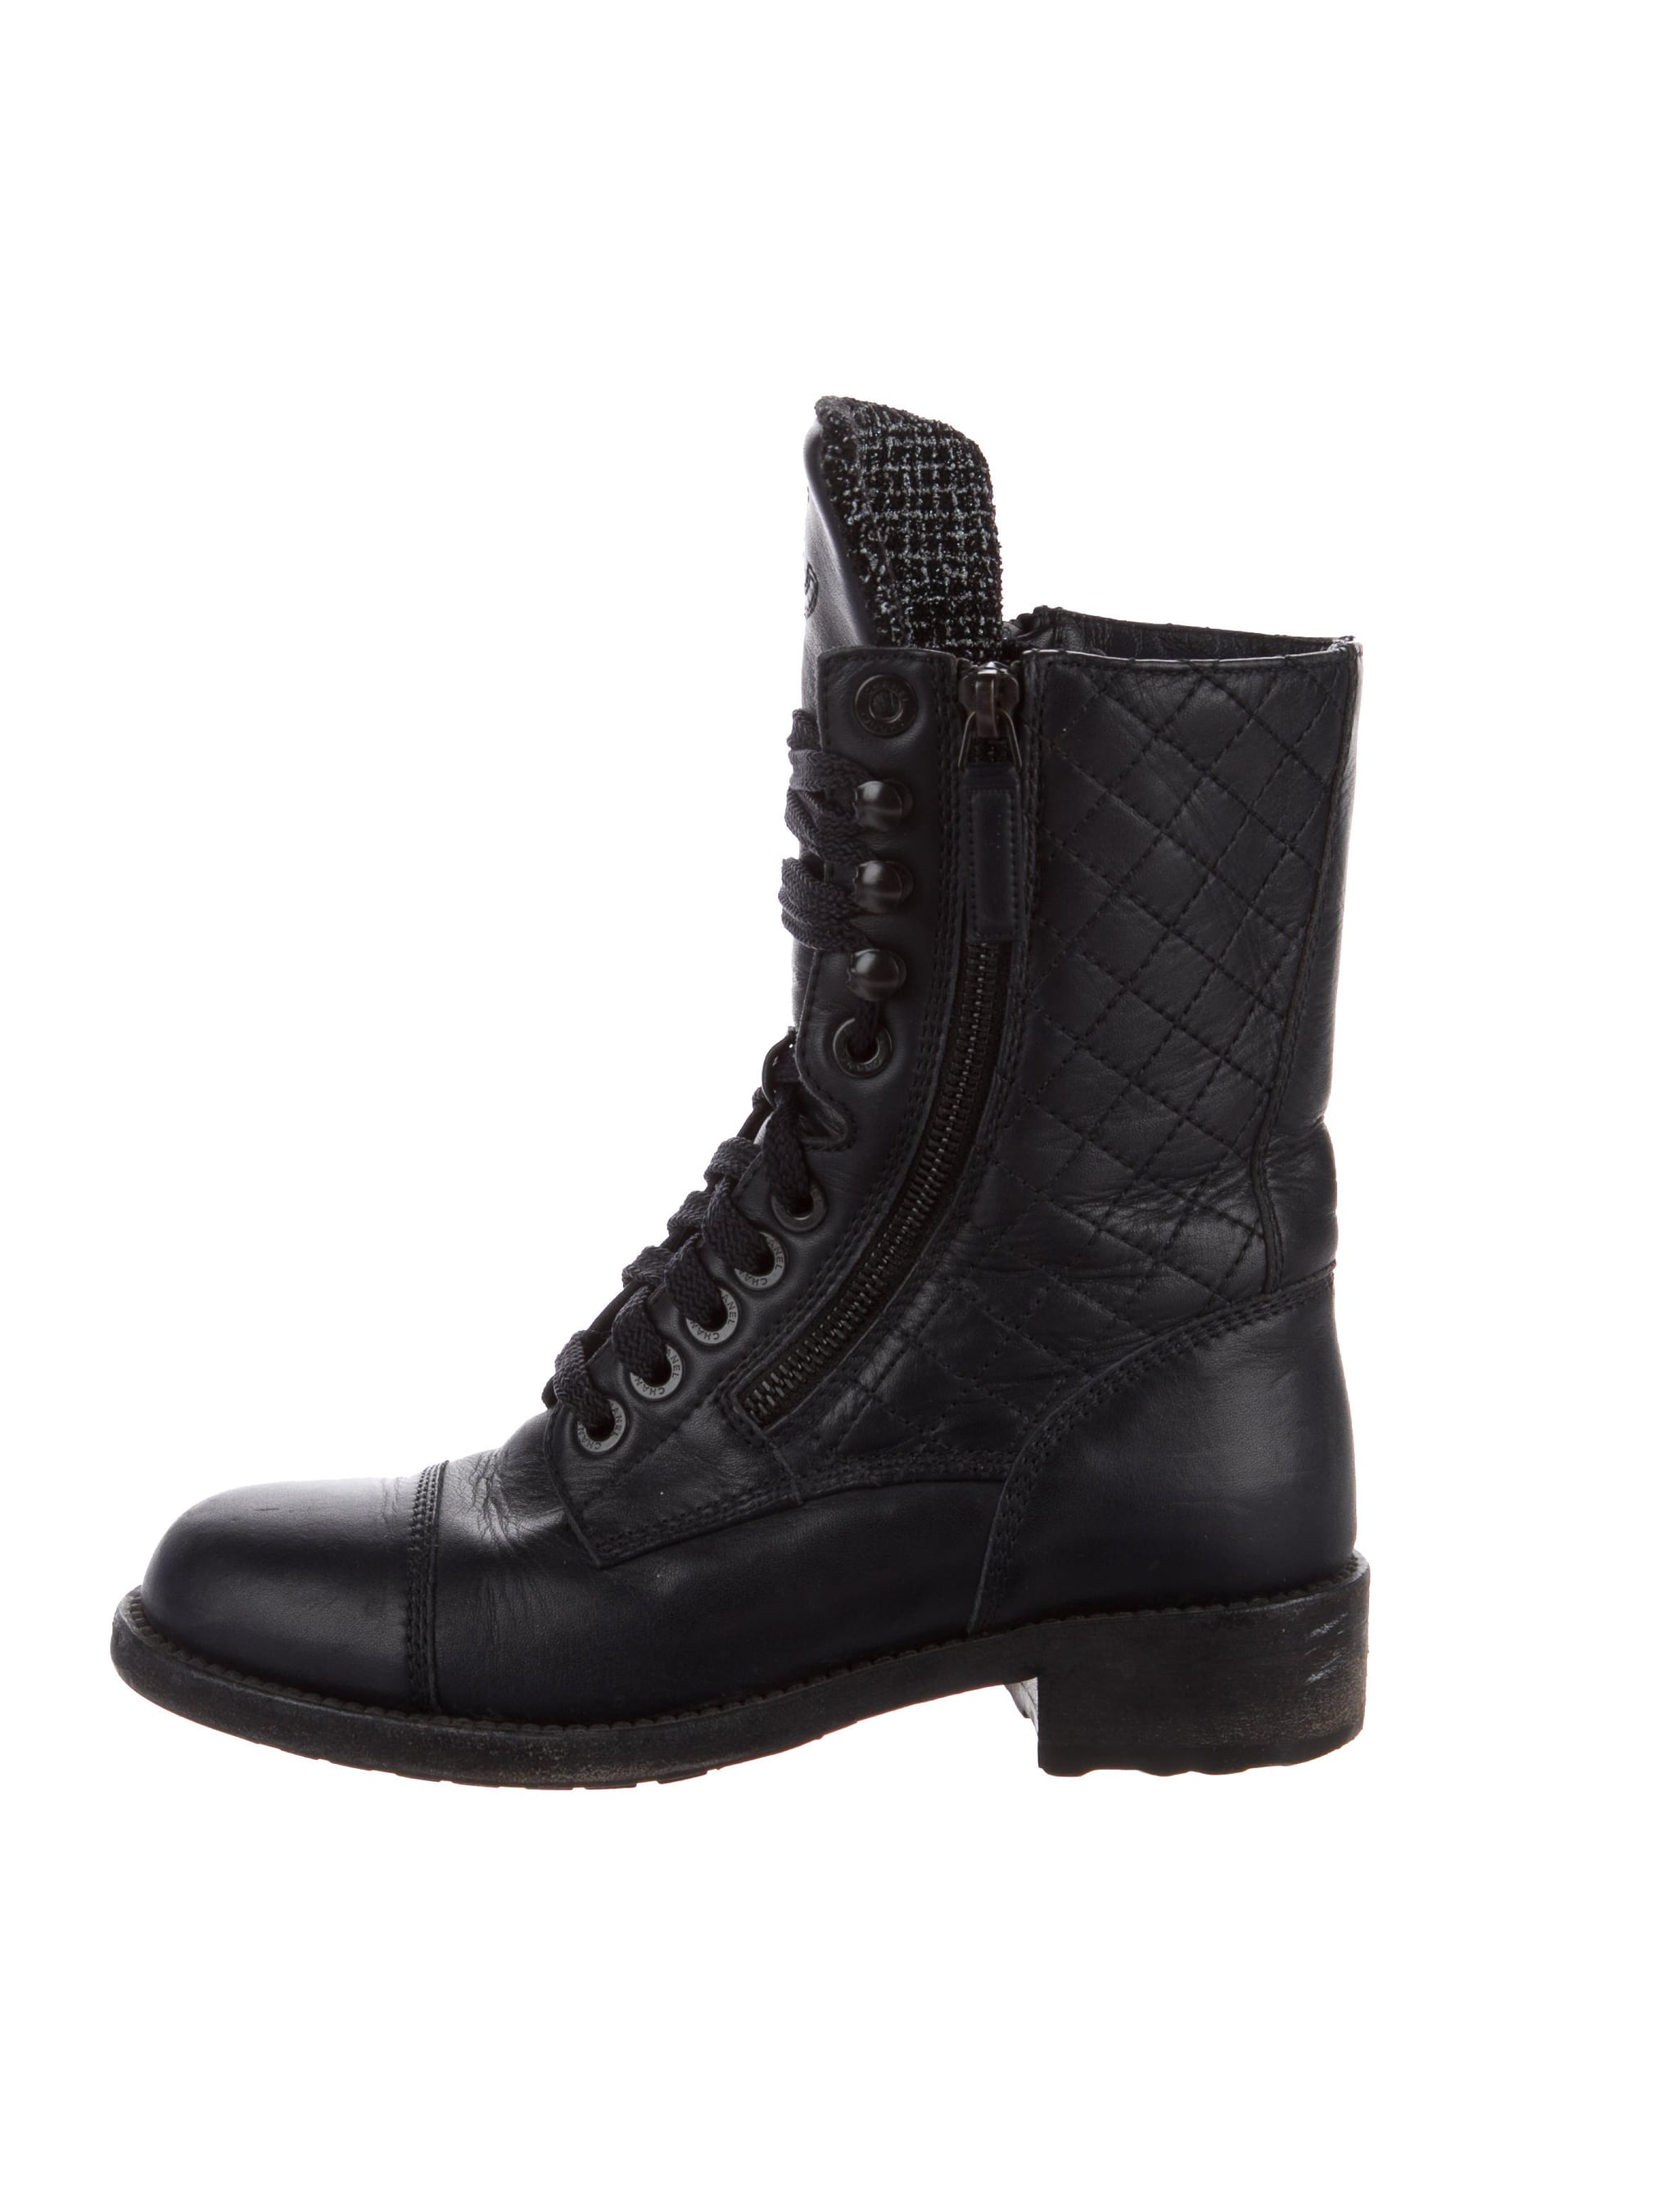 combat boots for women near me